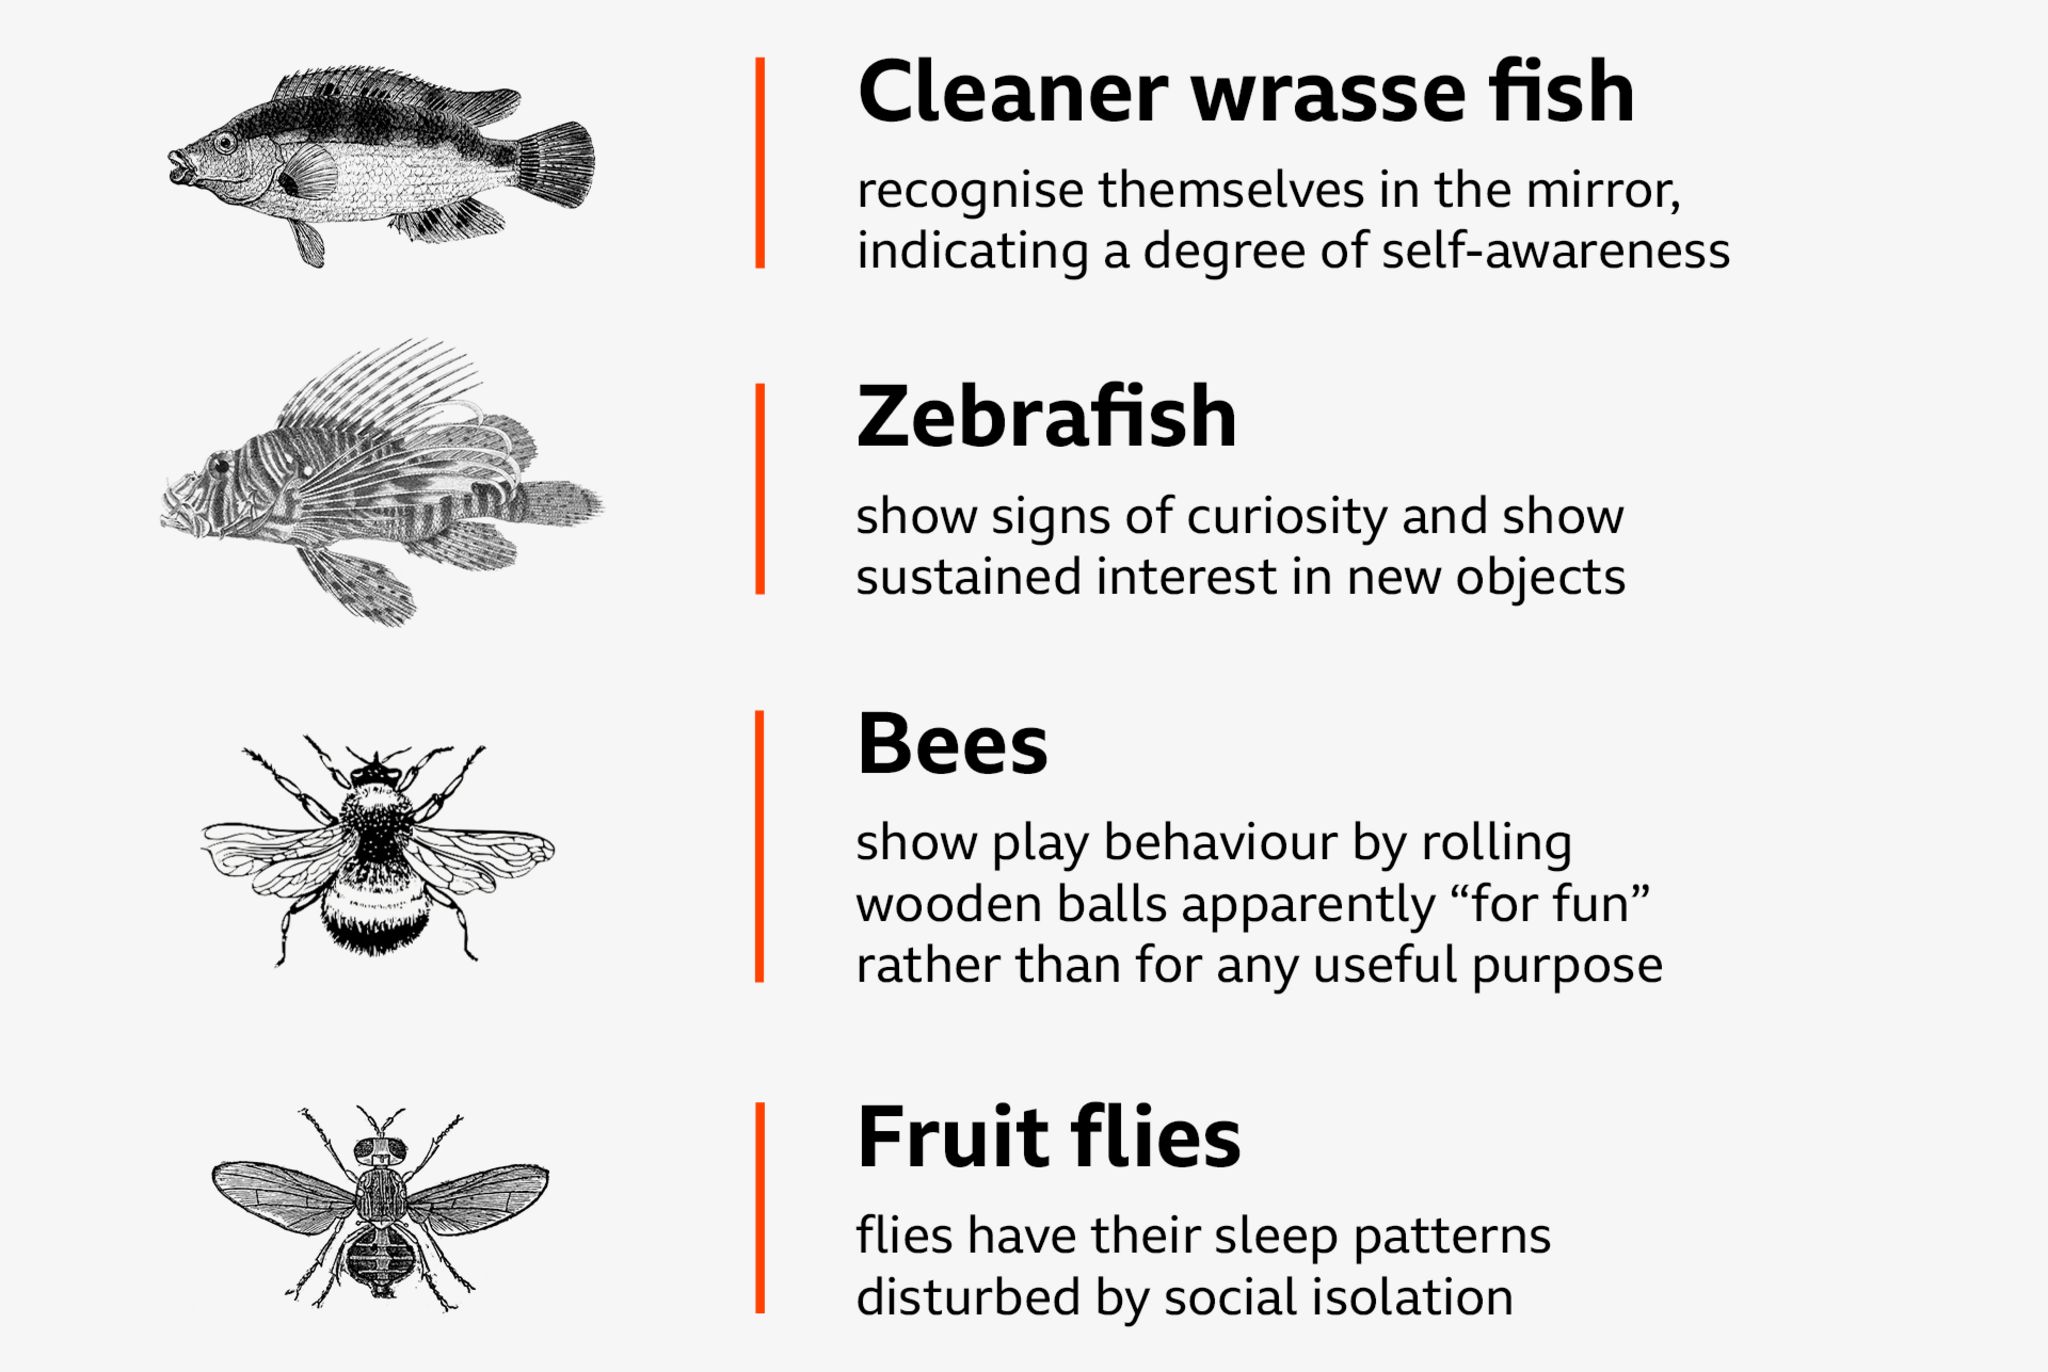 Cleaner wrasse fish recognise themselves in the mirror, indicating a degree of self-awareness. Zebrafish show signs of curiosity and show sustained interest in new objects.  · Bees show play behaviour by rolling wooden balls apparently “for fun” rather than for any useful purpose. Fruit flies have their sleep patterns disturbed by social isolation 